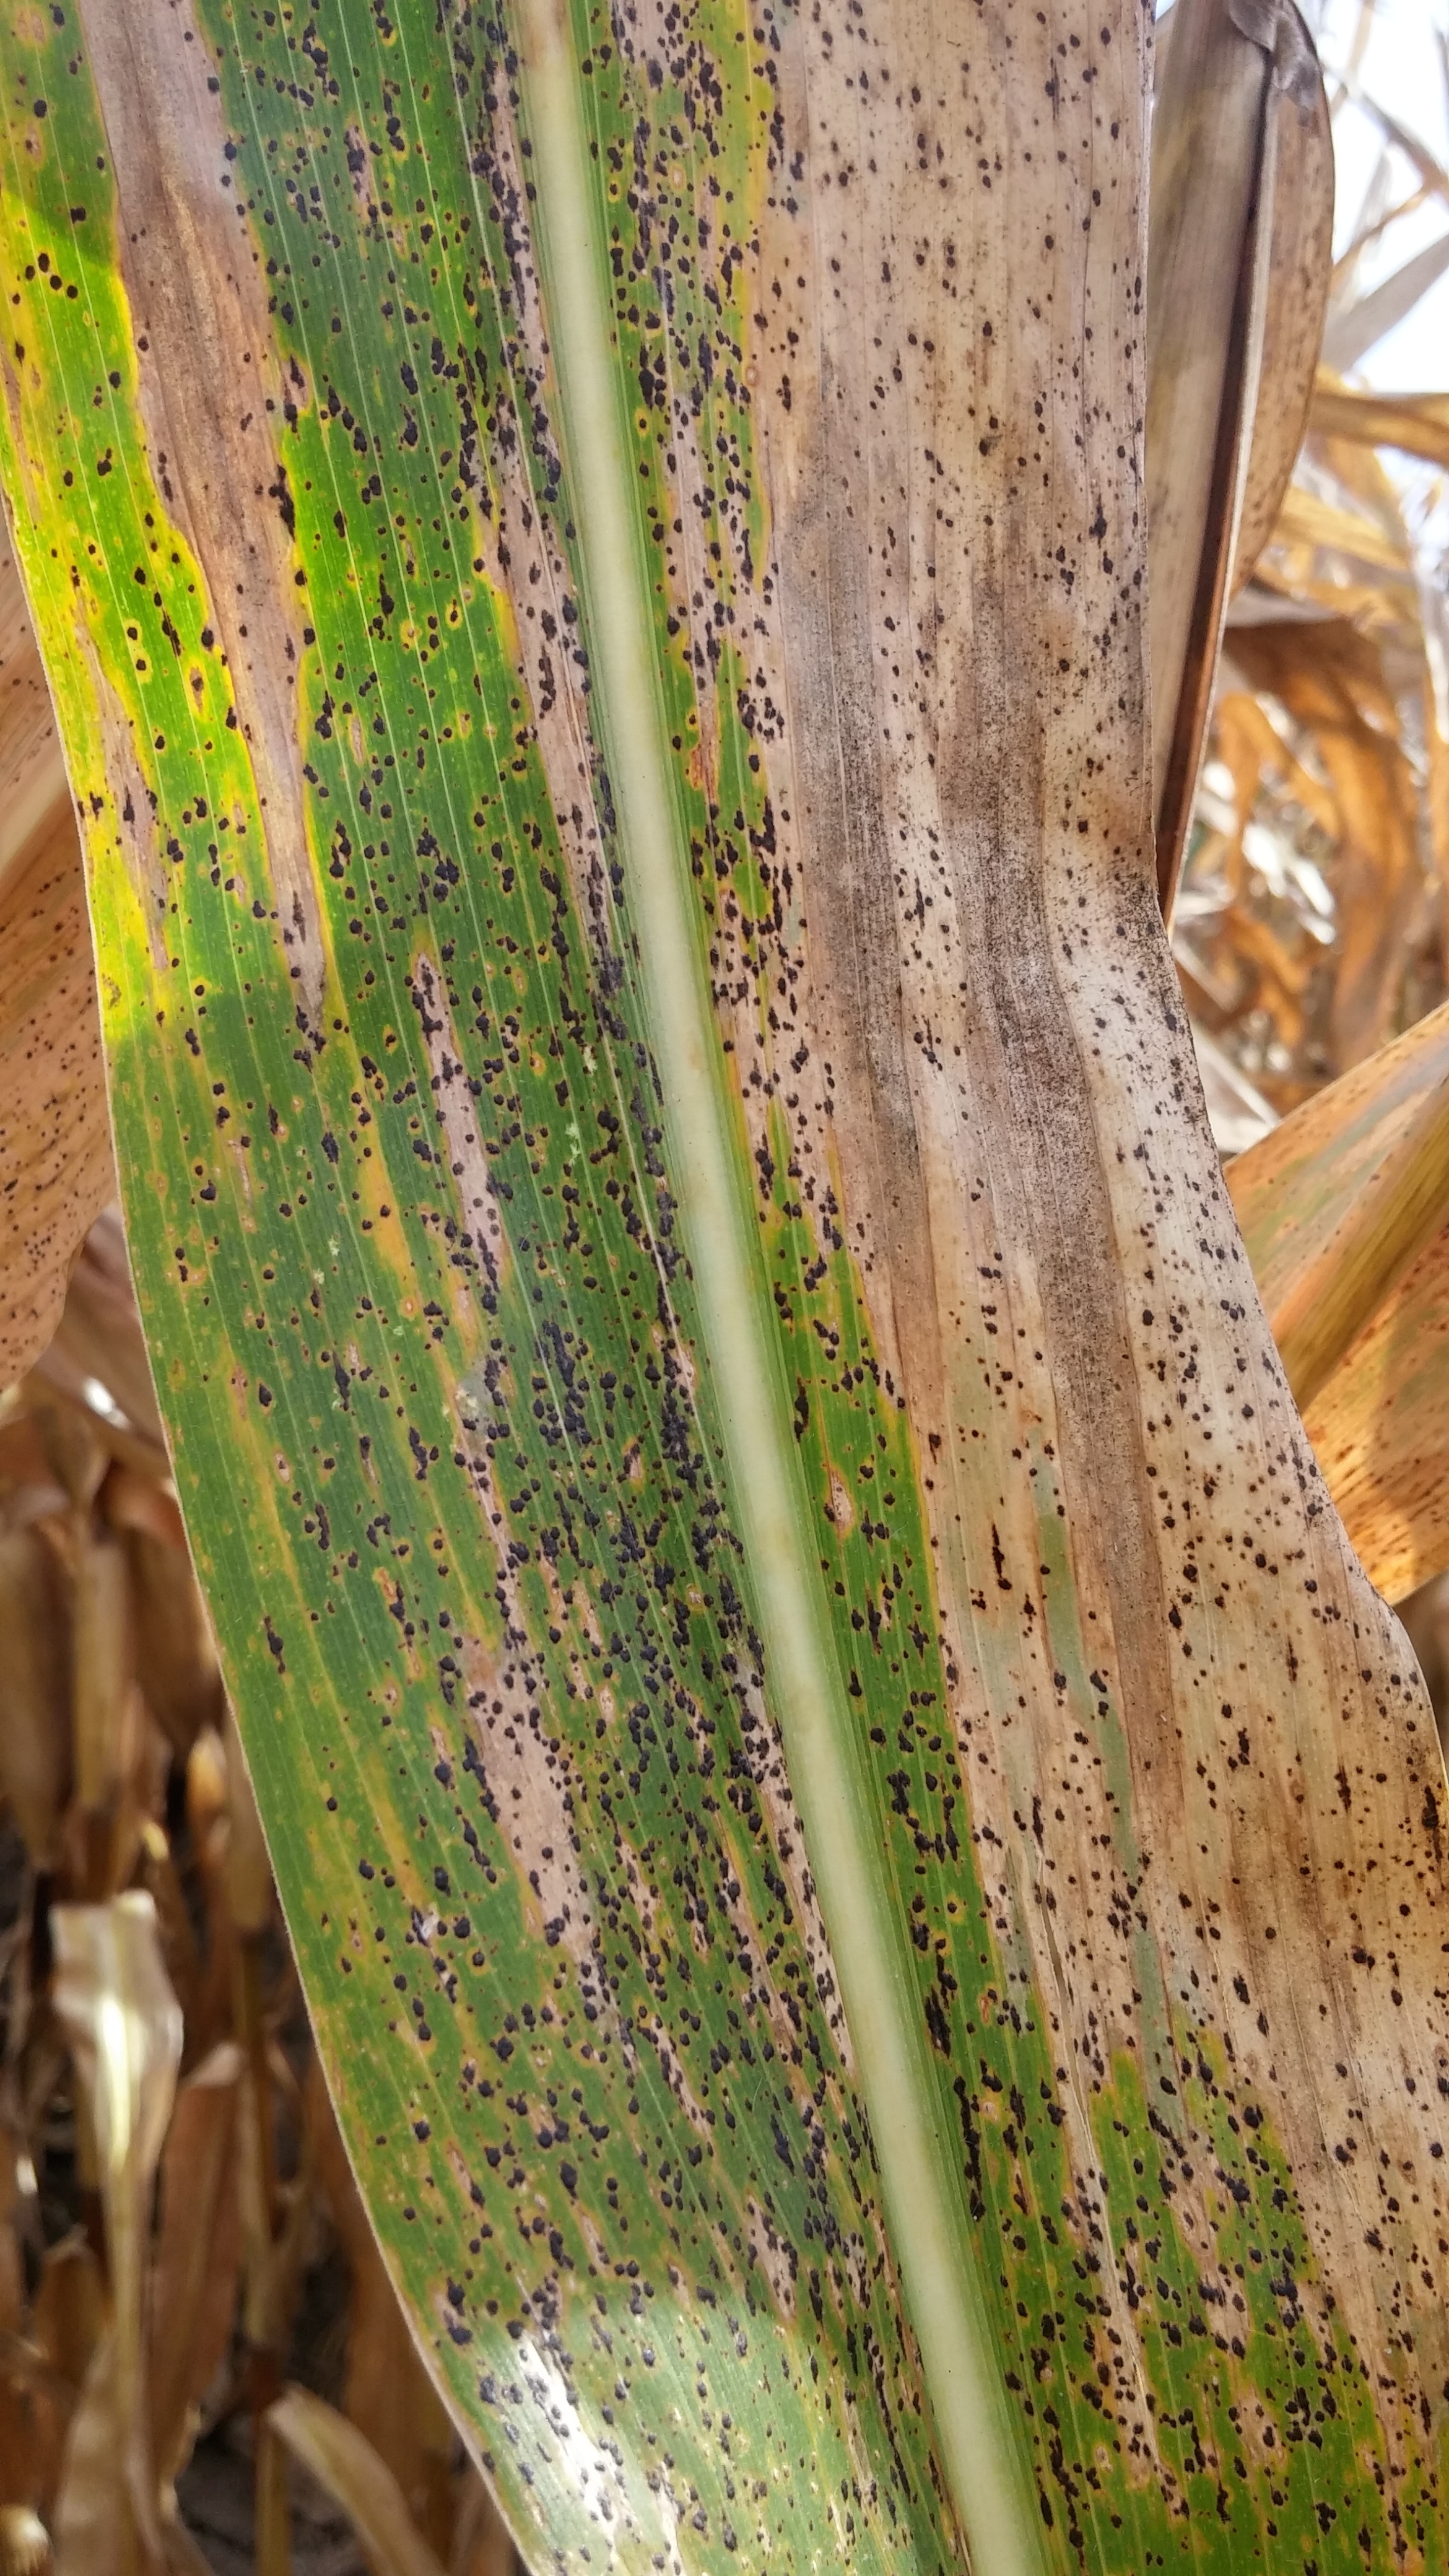 Open Figure 3. Stroma of tar spot covering a leaf with both green tissue and brown senescing tissue. Multiple diseases can occur with tar spot. These black raised dots are the stroma of the tar spot pathogen, which overwinters on residues at the soil surface. 